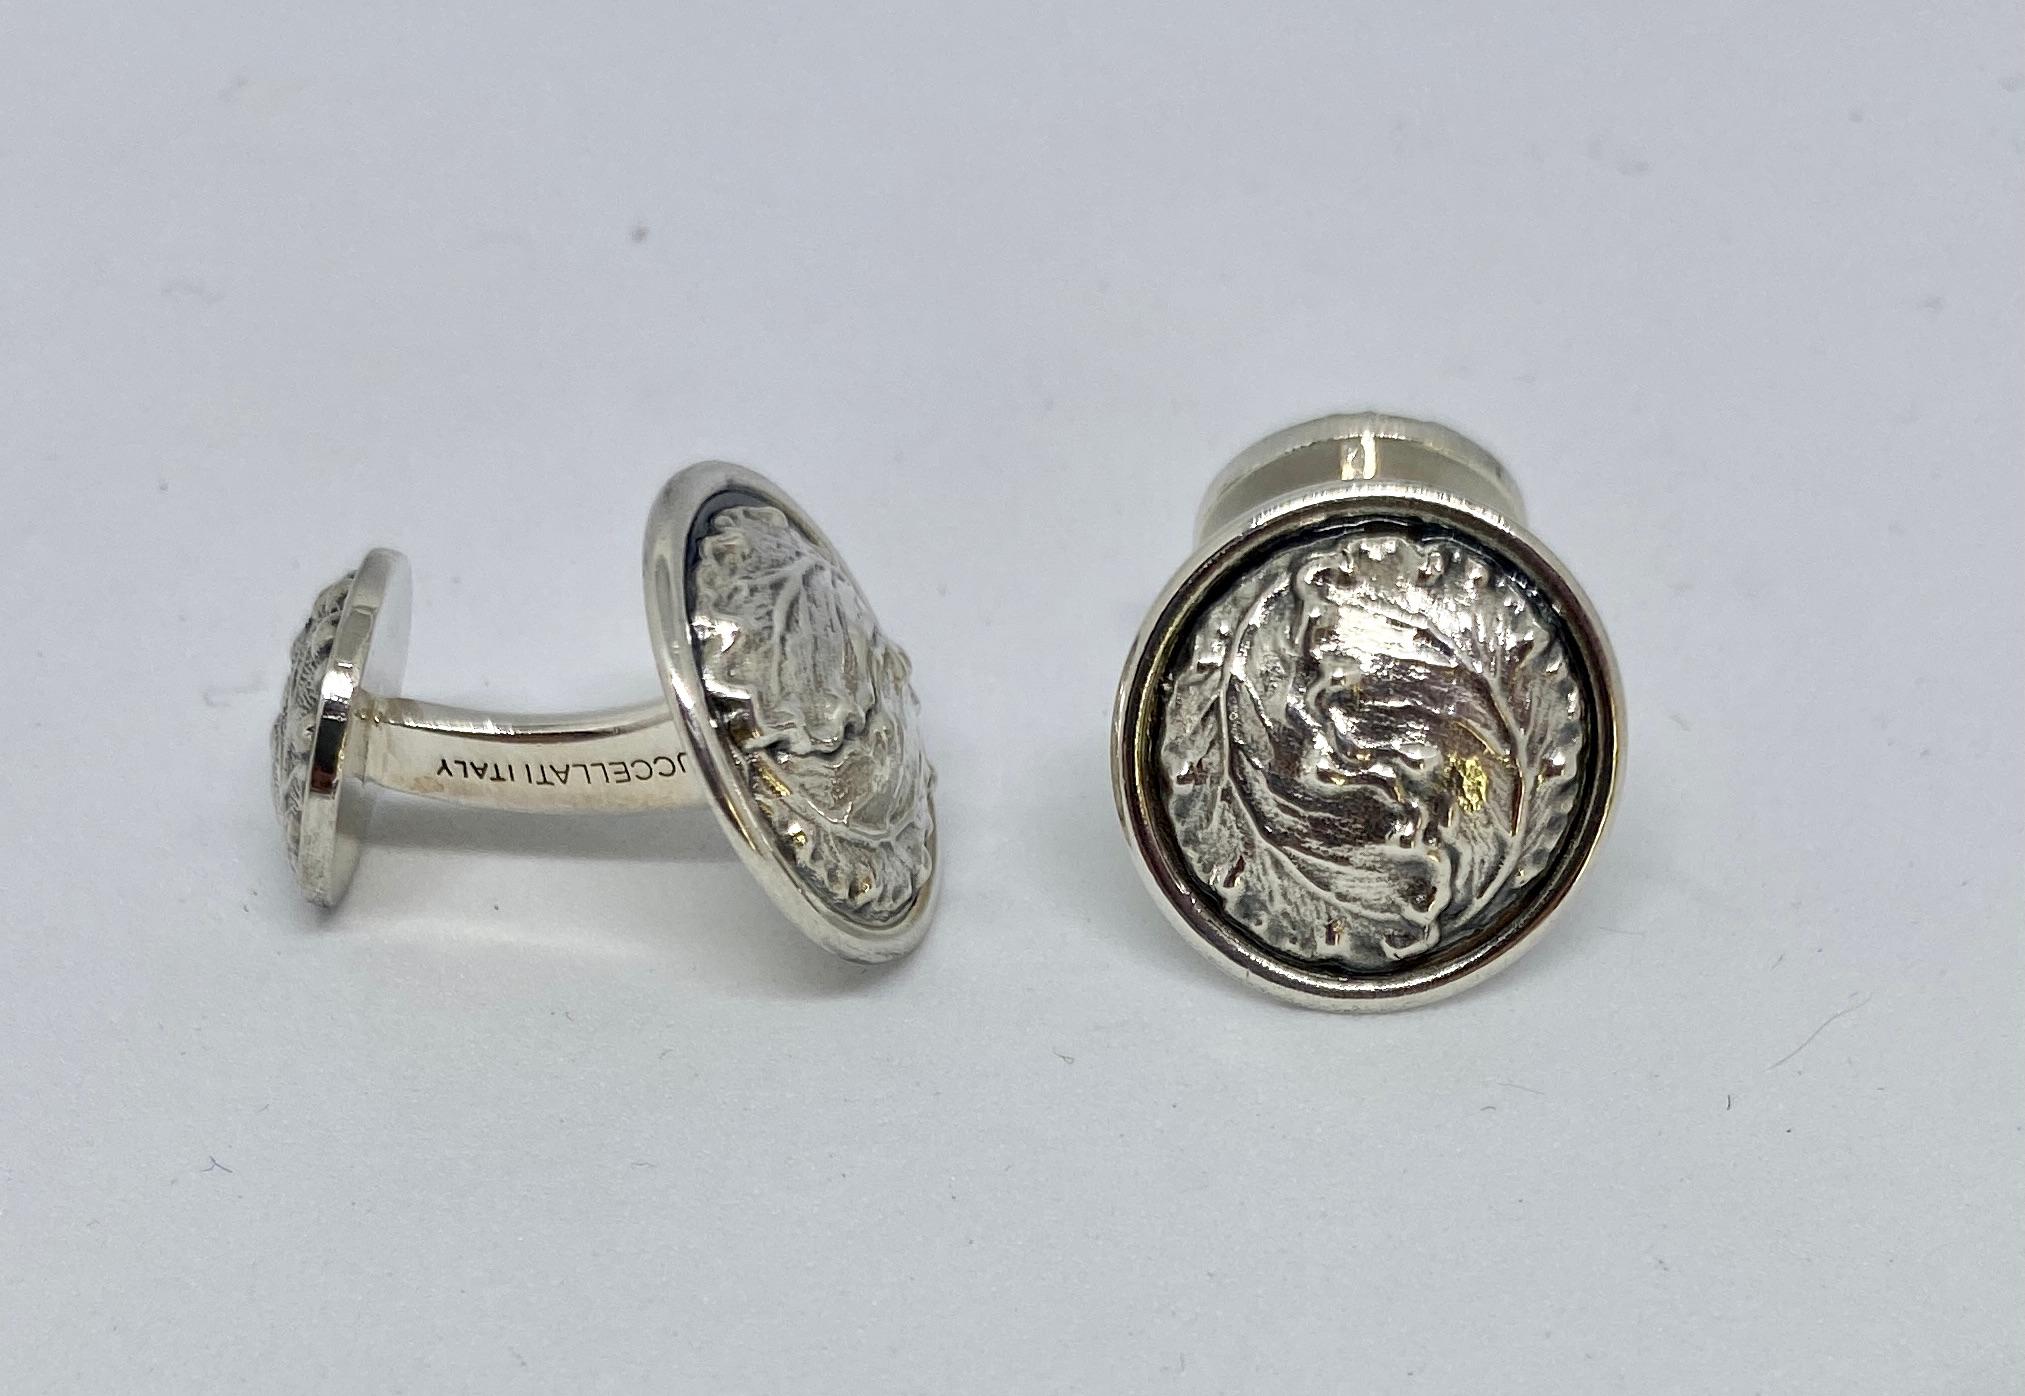 Handsome cufflinks in sterling silver featuring an oak leaf motif by Gianmaria Buccellati. These cufflinks were from a limited-edition series made in the early 2000s; they're highly collectible today.

The cufflink faces measure approximately 18 mm